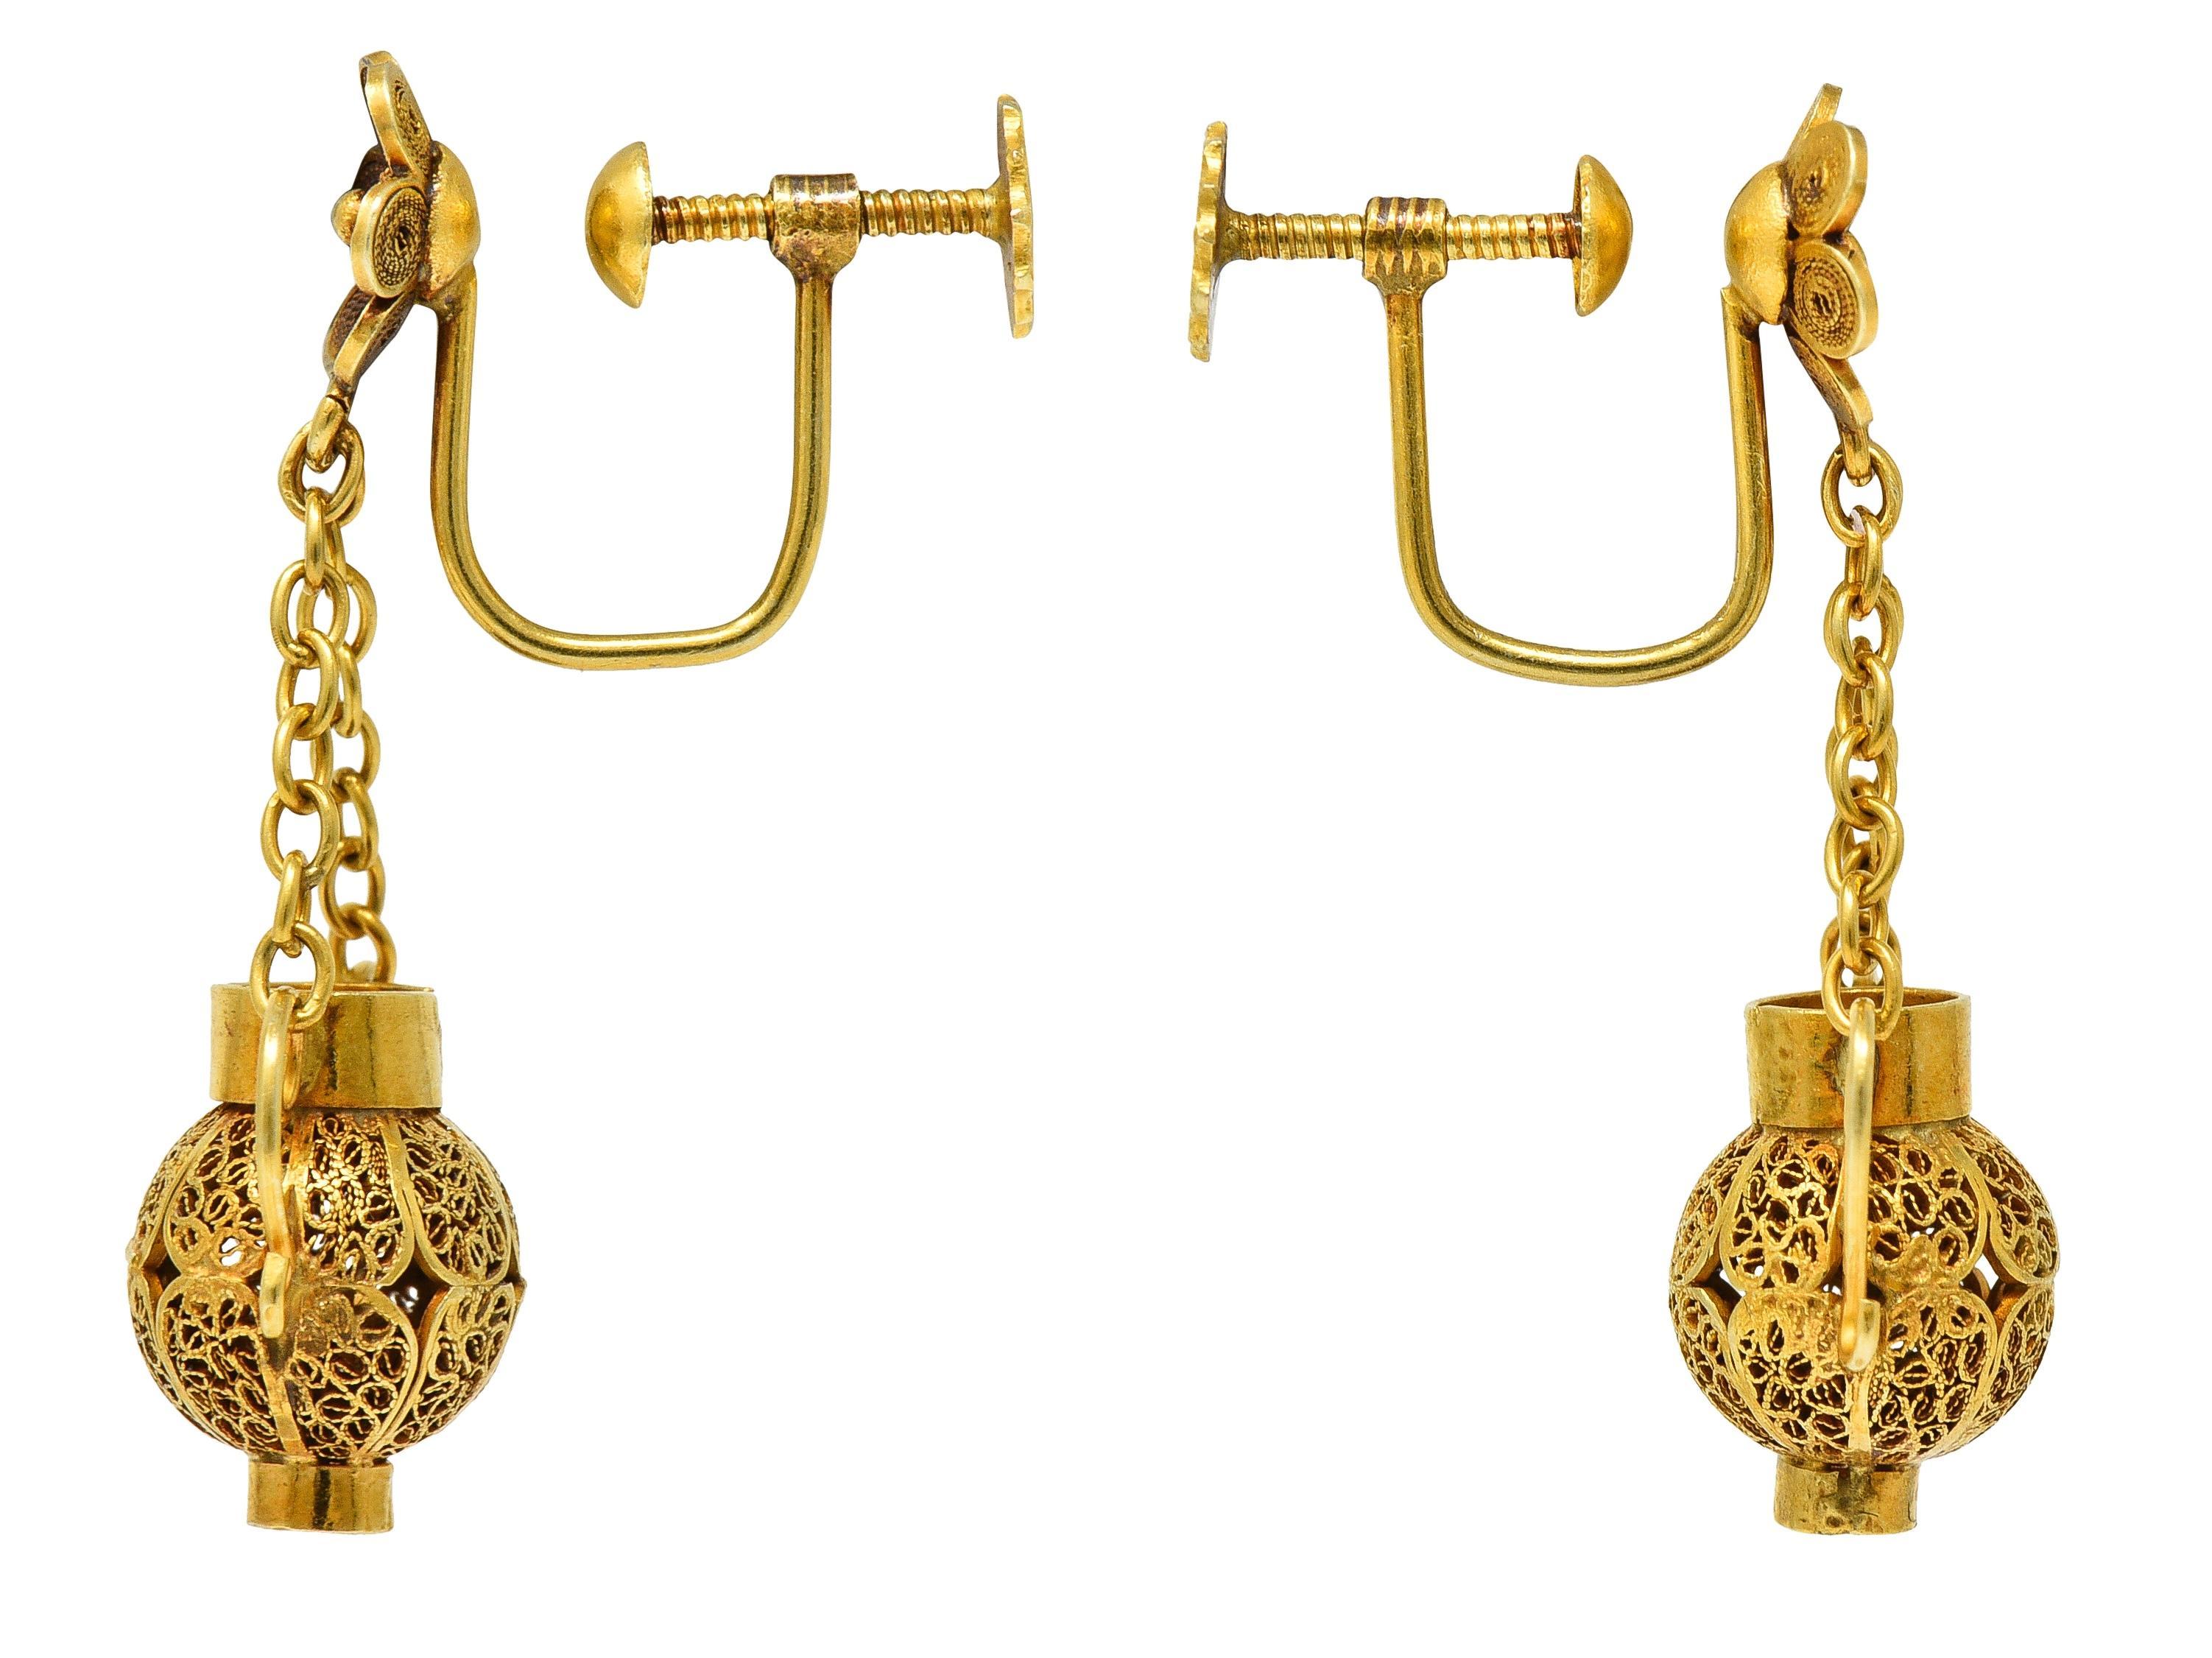 Comprised of floral surmounts with curling filigree petals suspending drops via cable chain
Drops are designed as stylized amphora vases
With filigree body and scrolling wire handles
Completed by screw-back closures
Tested as 18 karat gold
Circa: